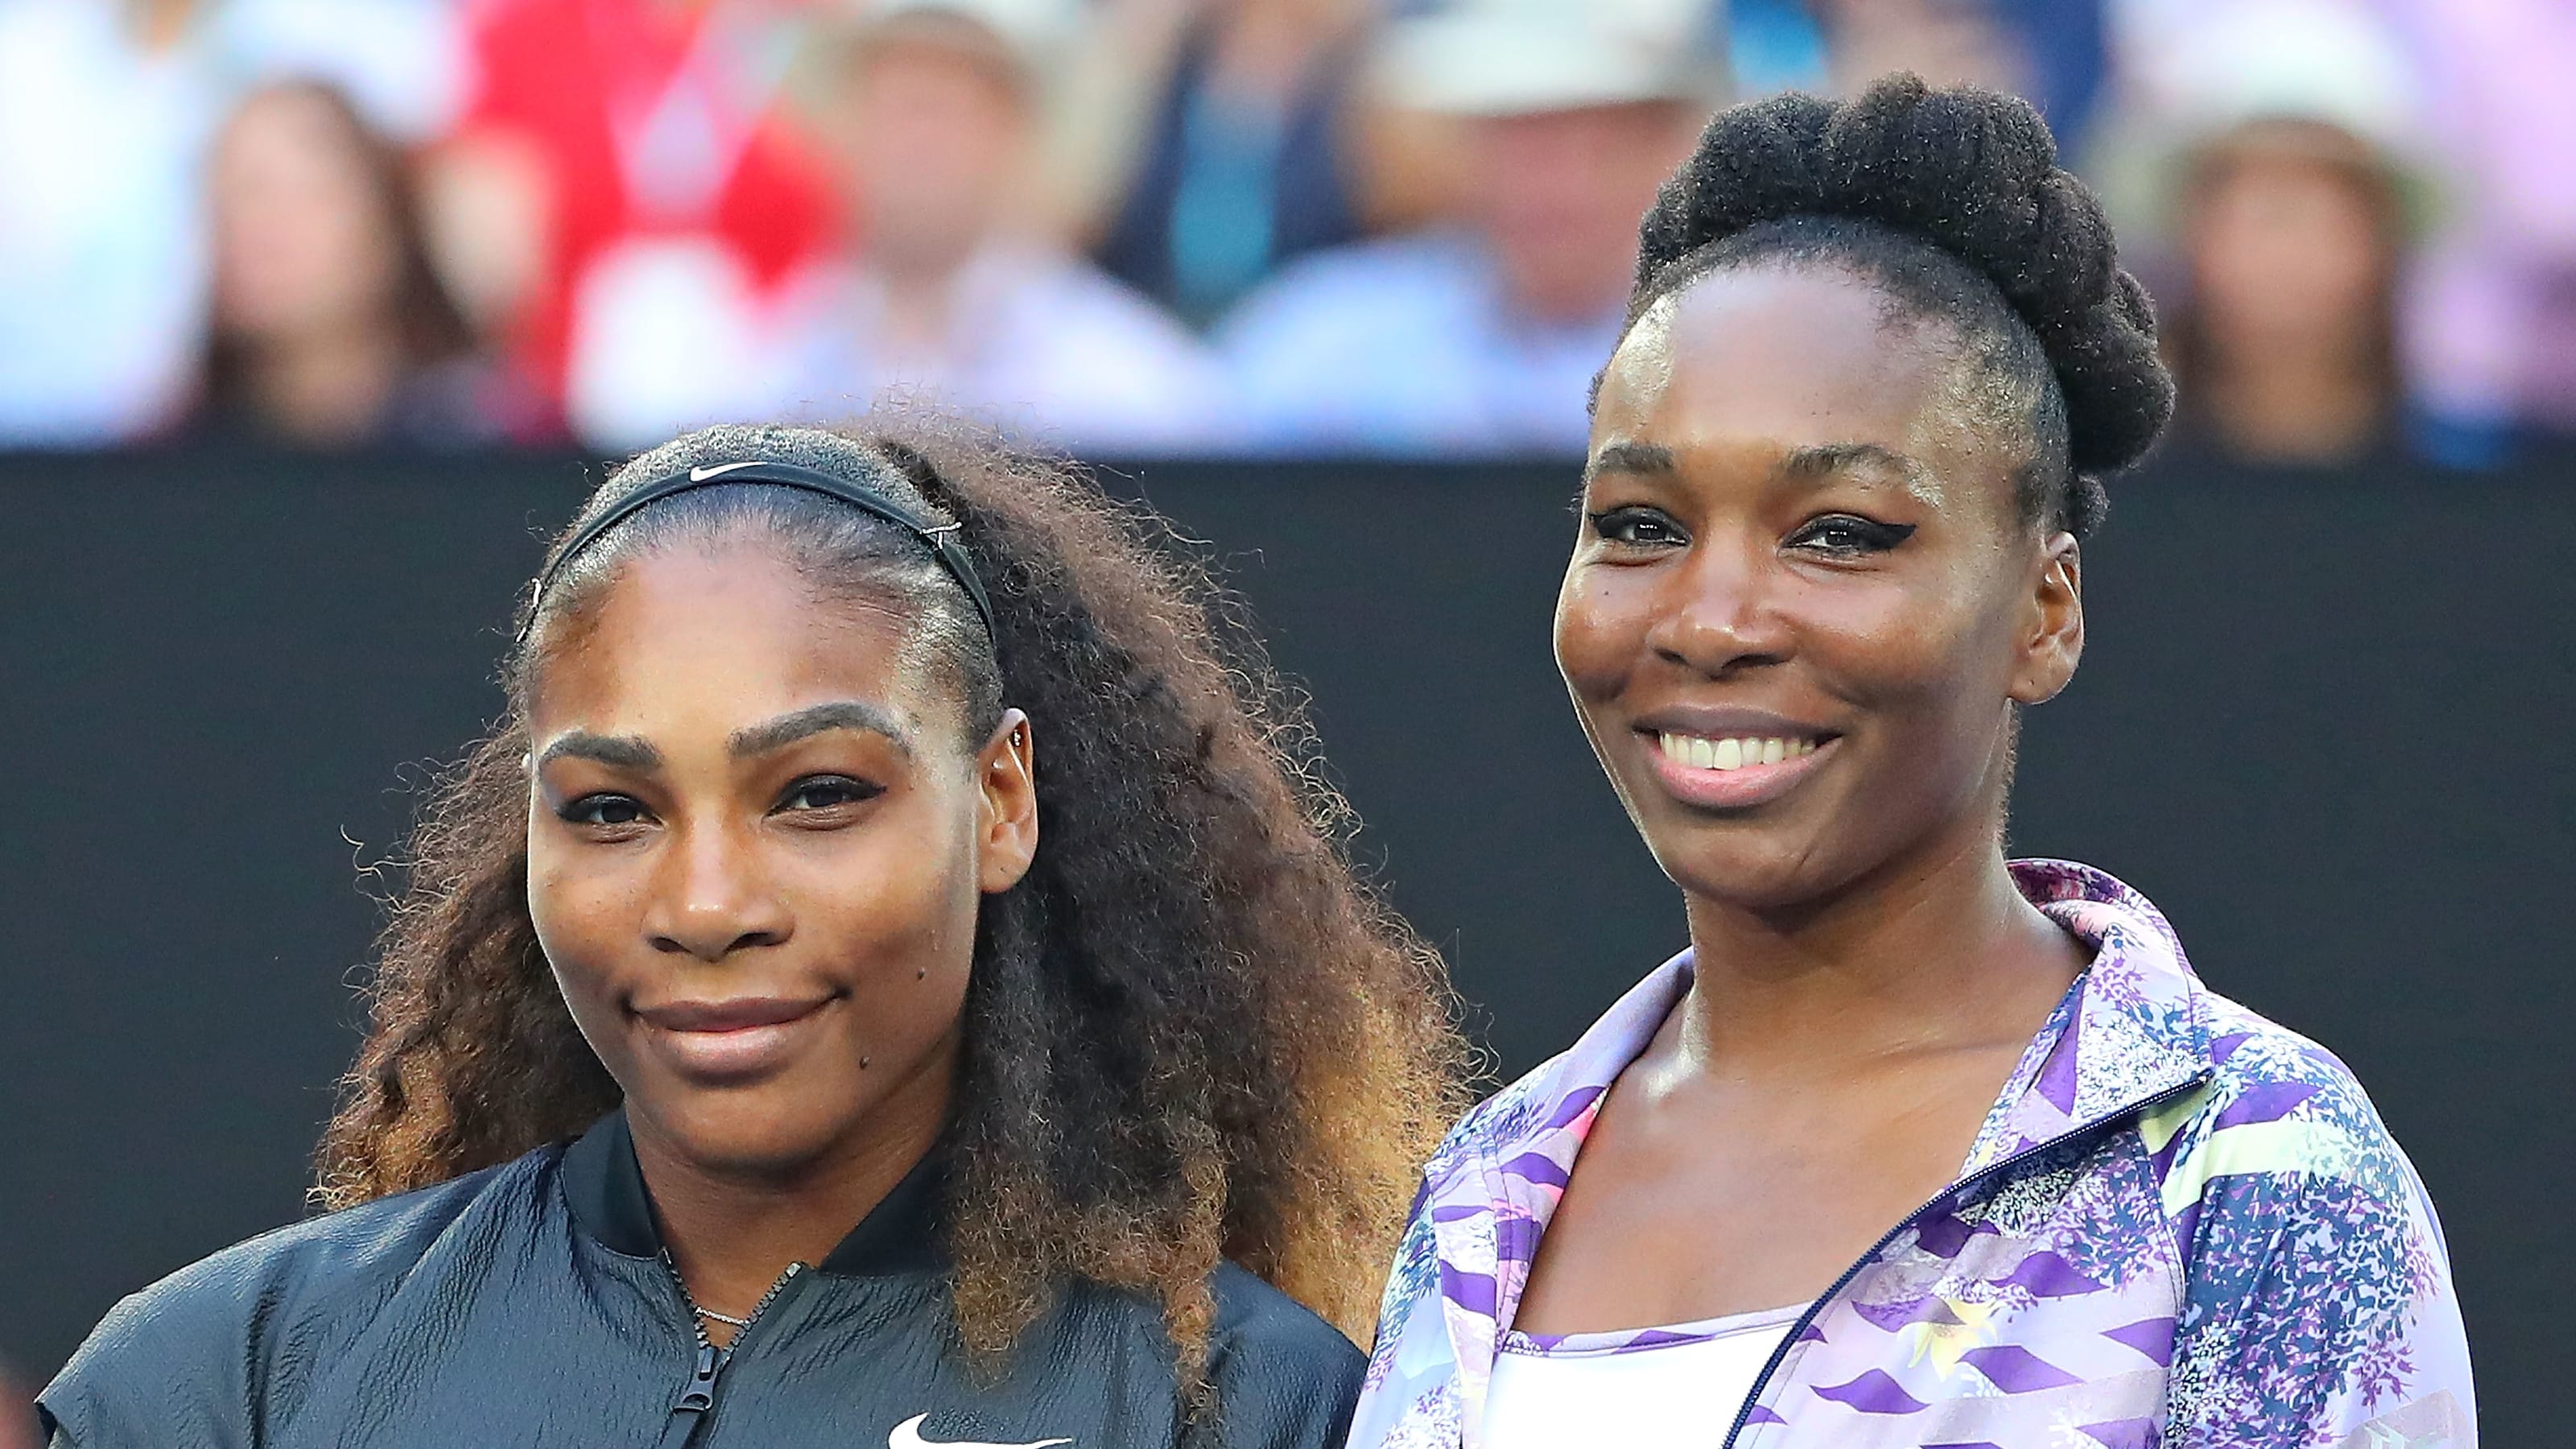 Venus and Serena: 5 things to know about this historic sibling rivalry